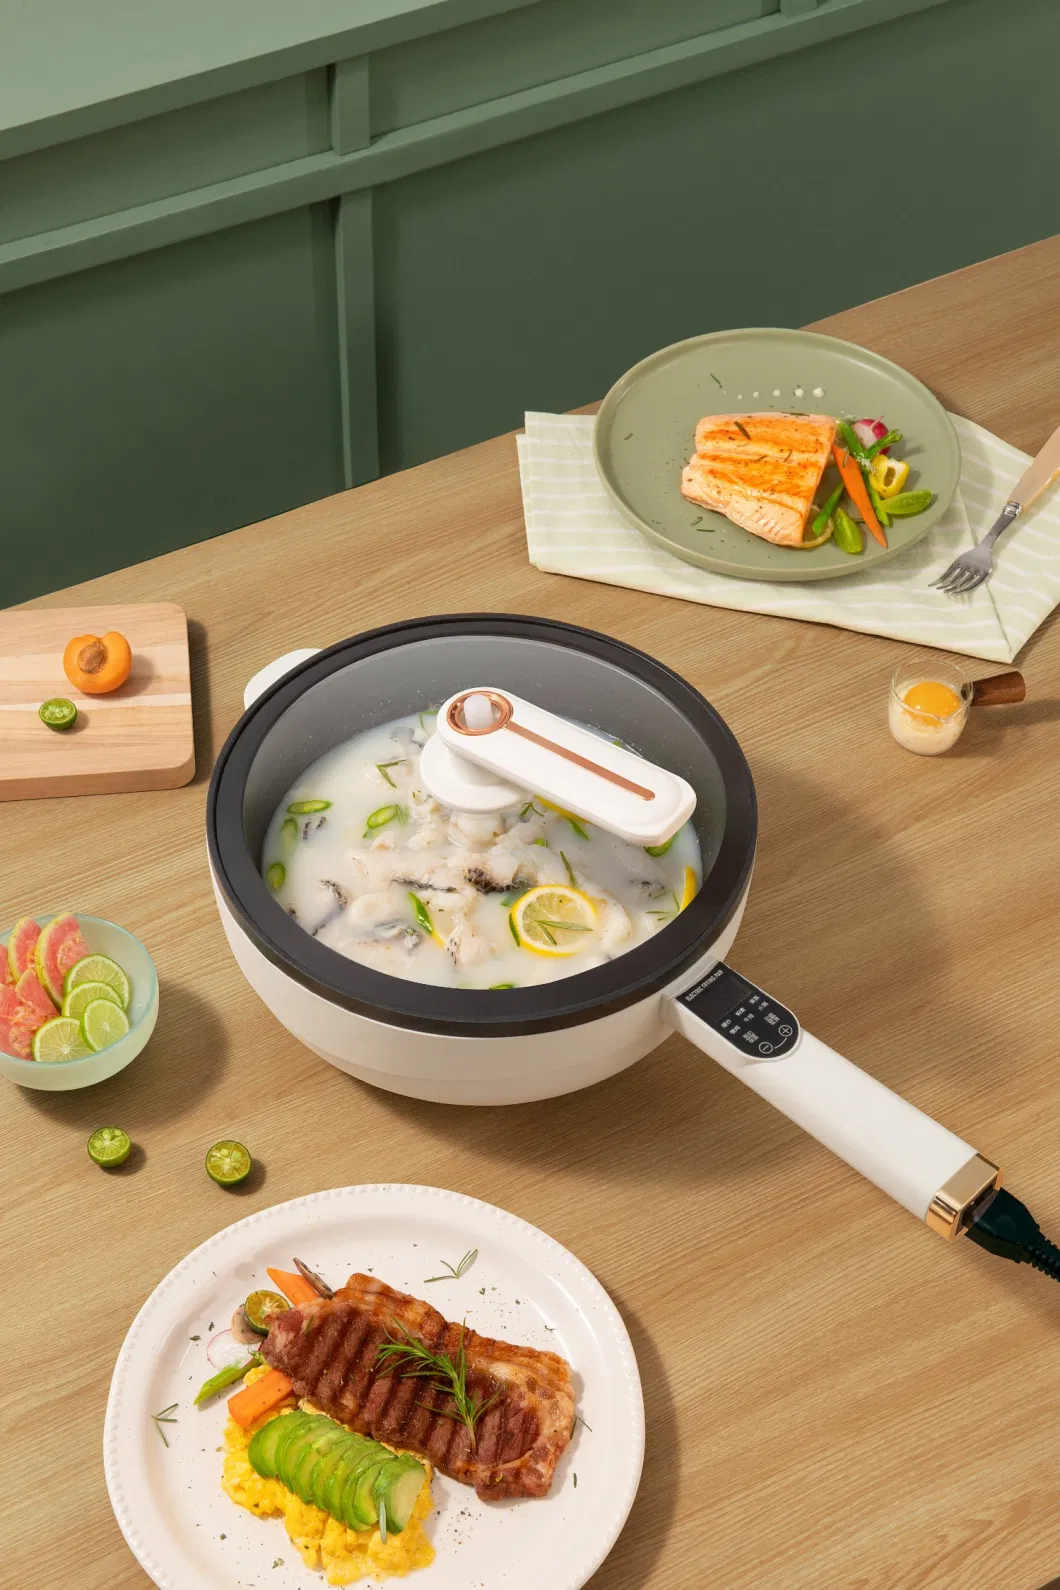 Portable Cooking Pot Non-Stick Frying Pan Multi Function Roasting All-in-One Pan